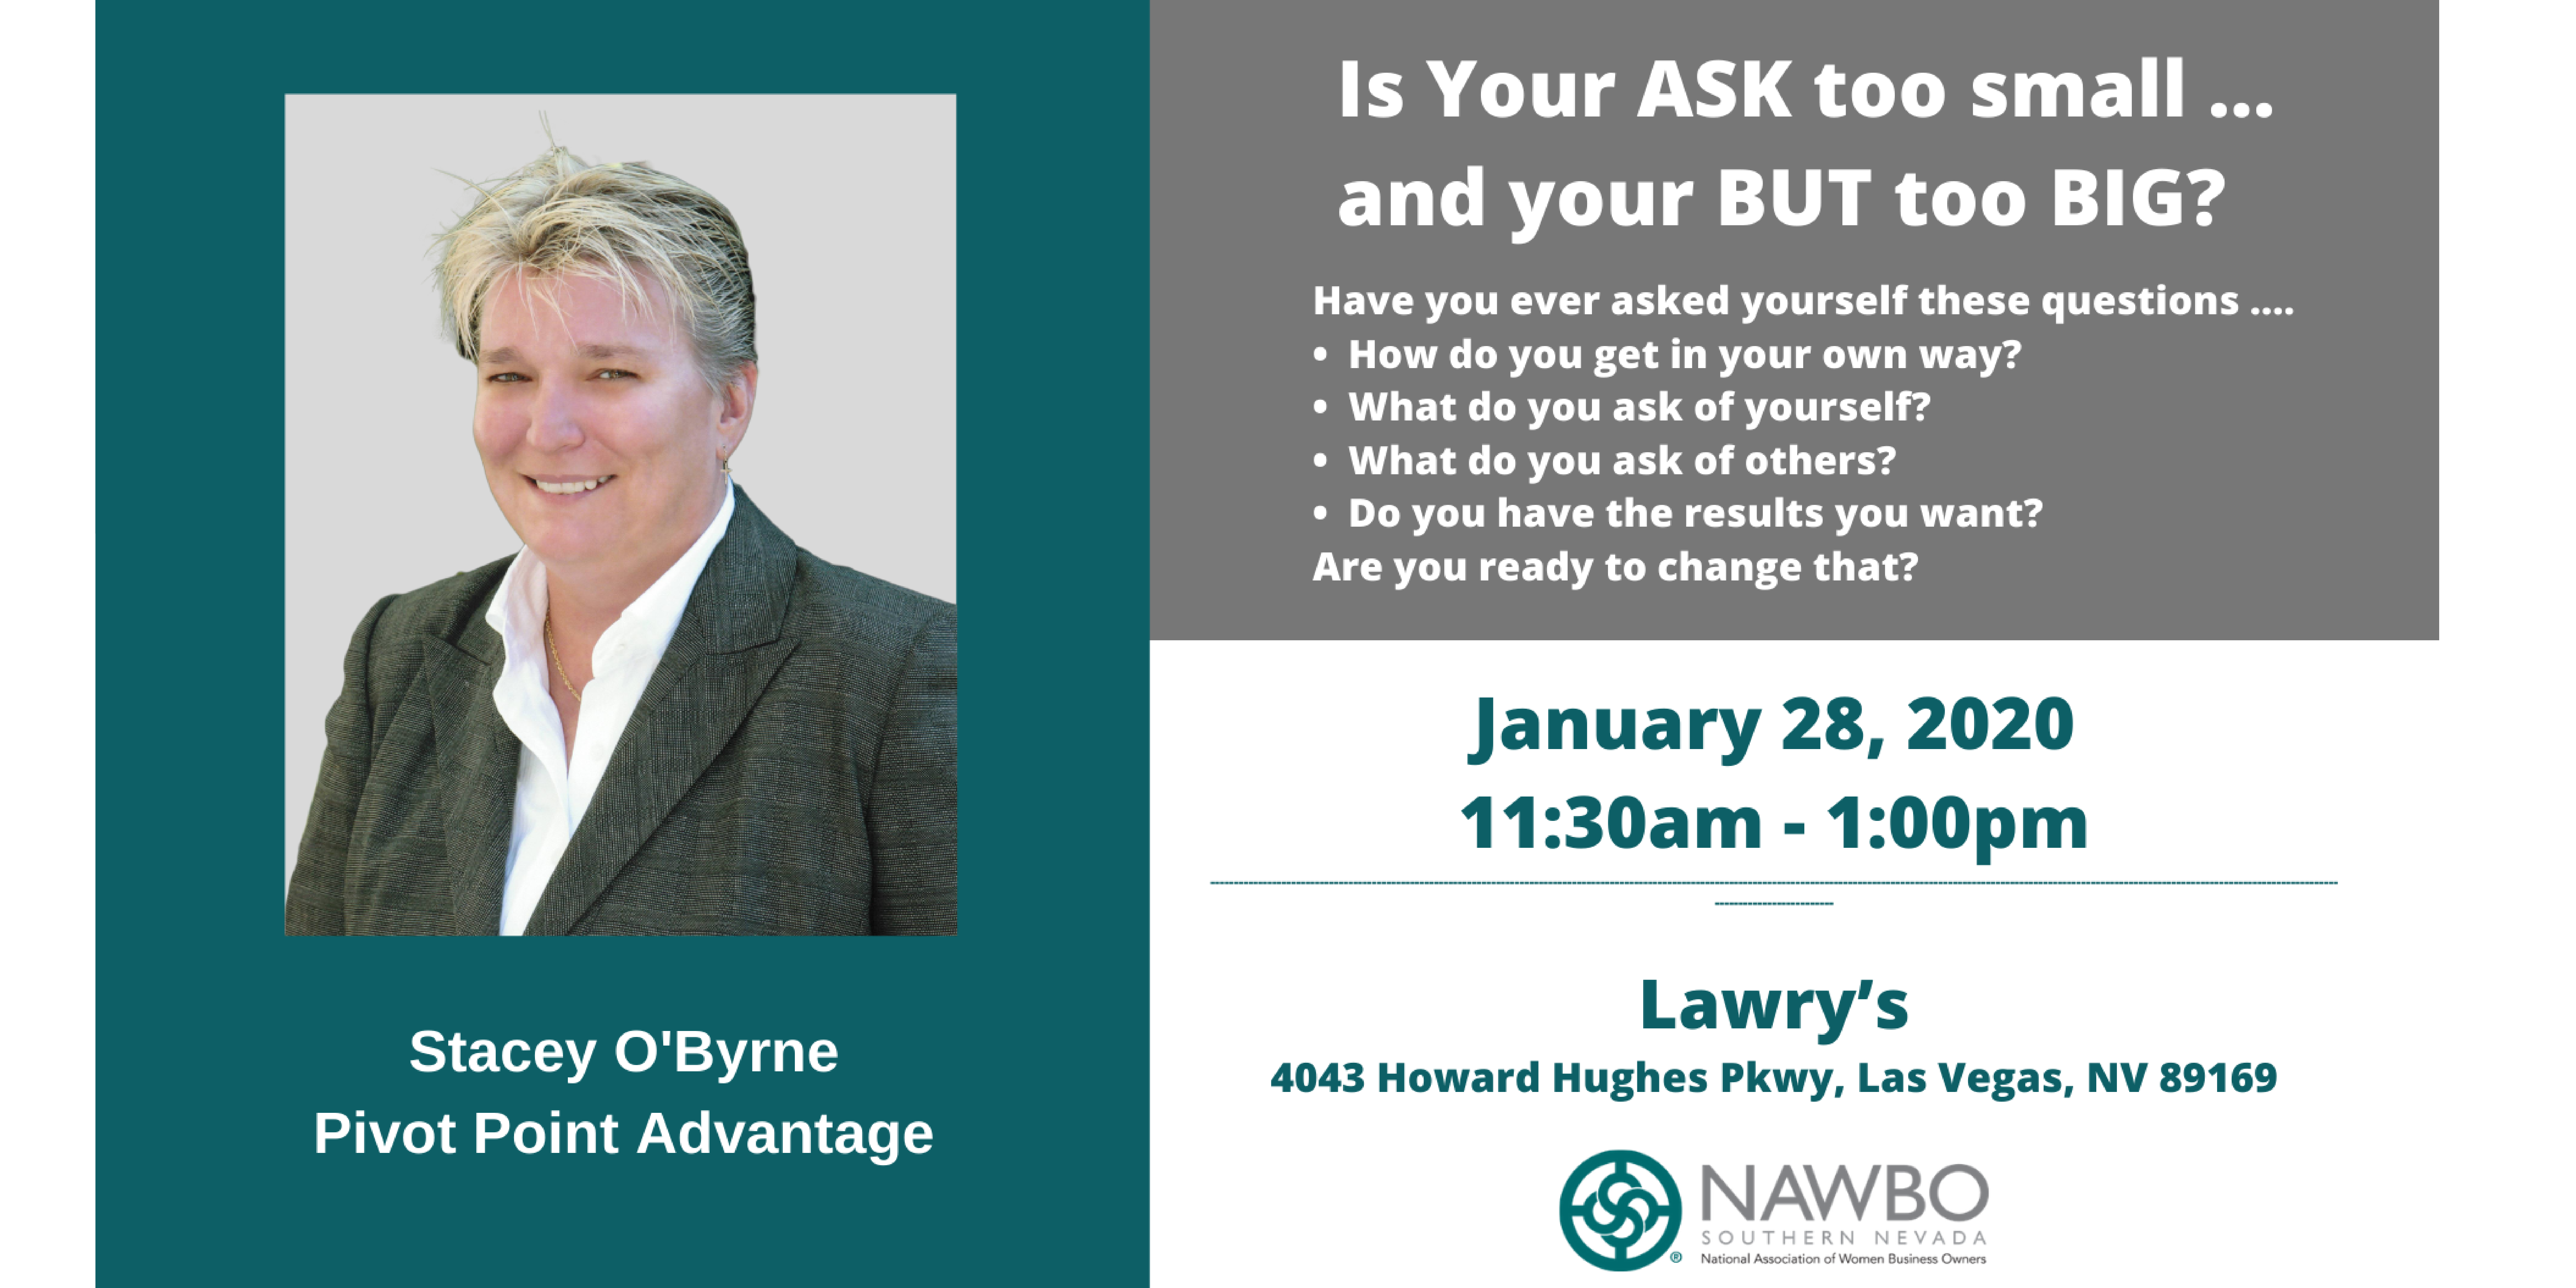 NAWBO Southern Nevada Business Lunch: Is Your ASK too small...and your BUT too BIG?